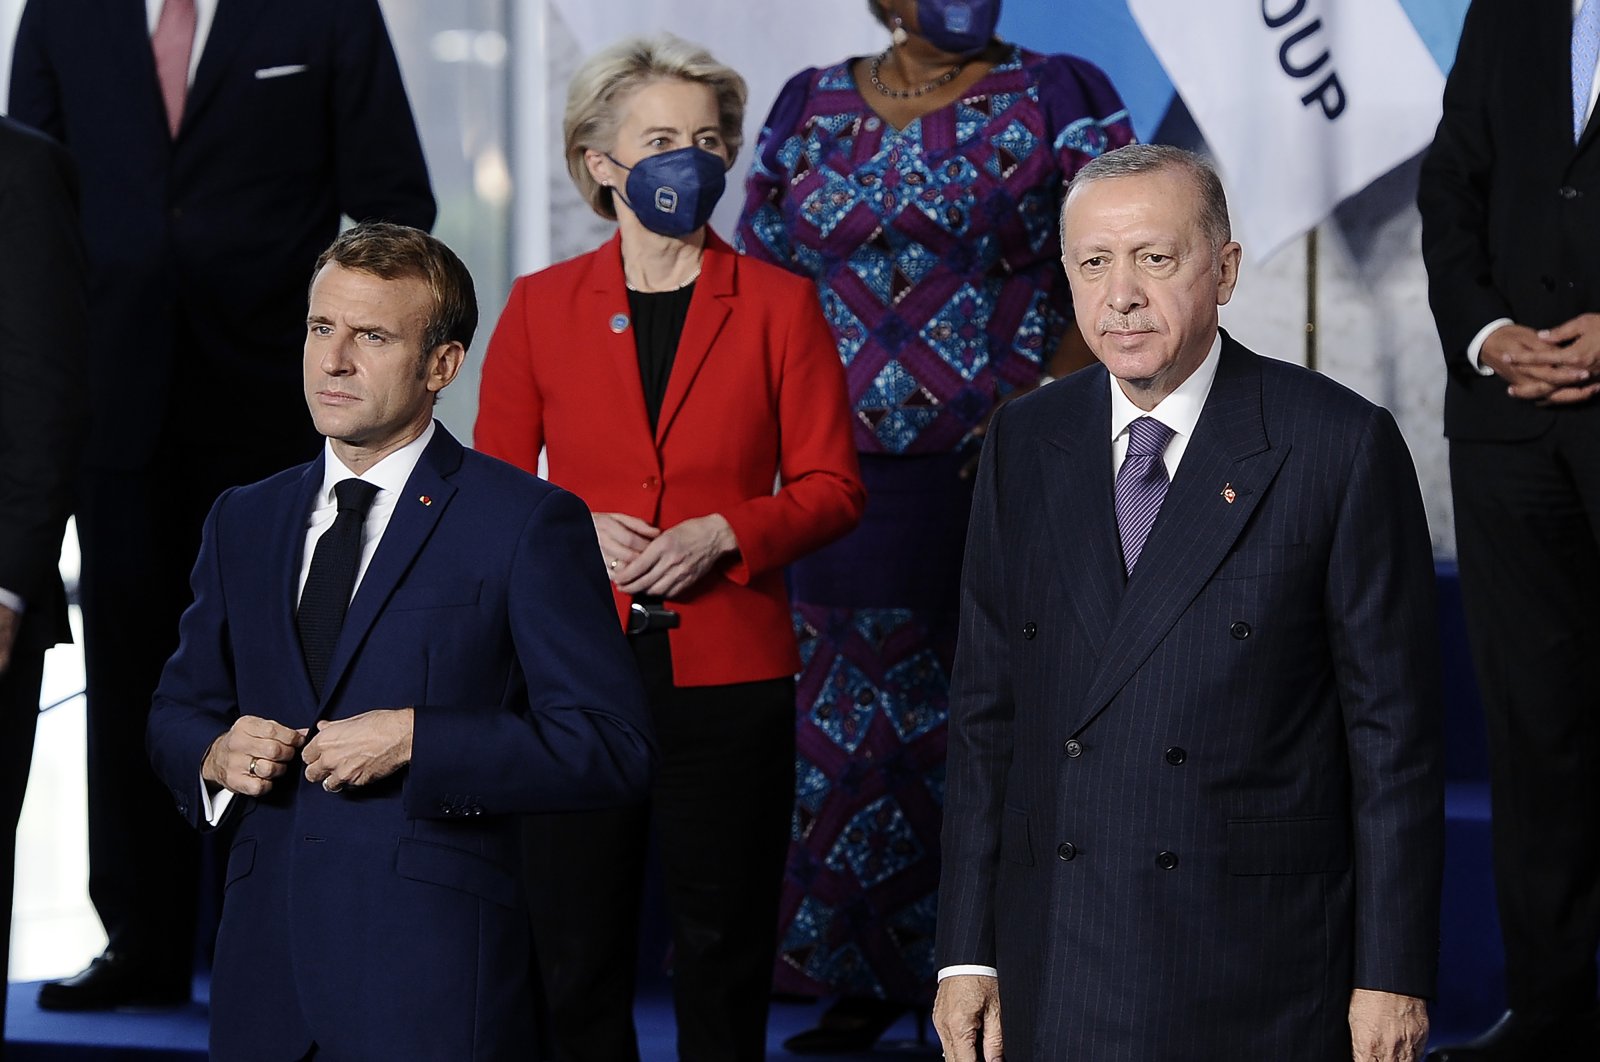 President Recep Tayyip Erdoğan and France's President Emmanuel Macron (L) attend the group photo session at the G-20 summit in Rome, Italy, Oct. 30, 2021. (Photo by Getty Images)